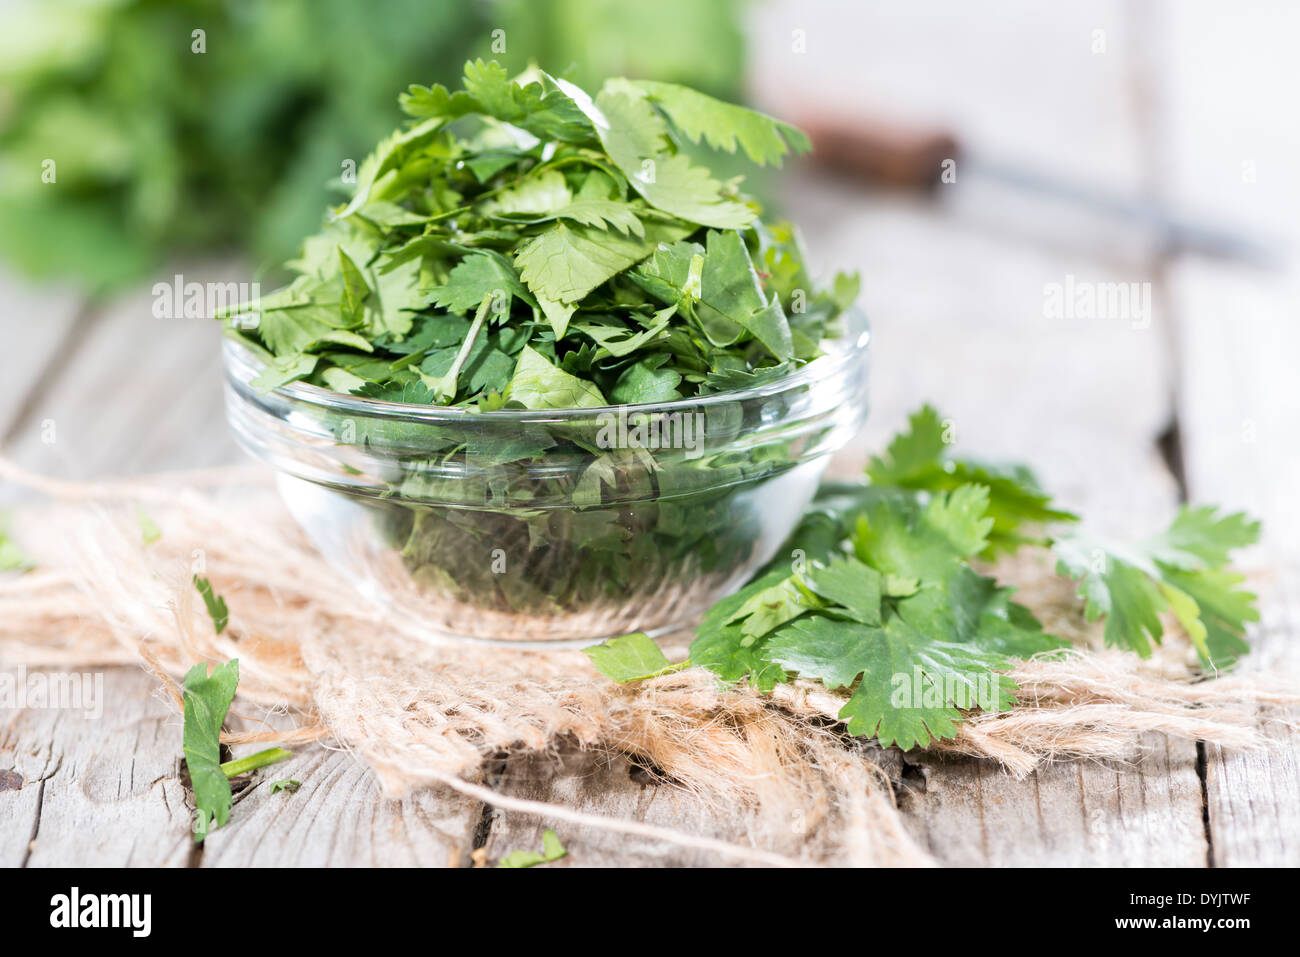 Portion of fresh green Cilantro leaves on wooden background Stock Photo